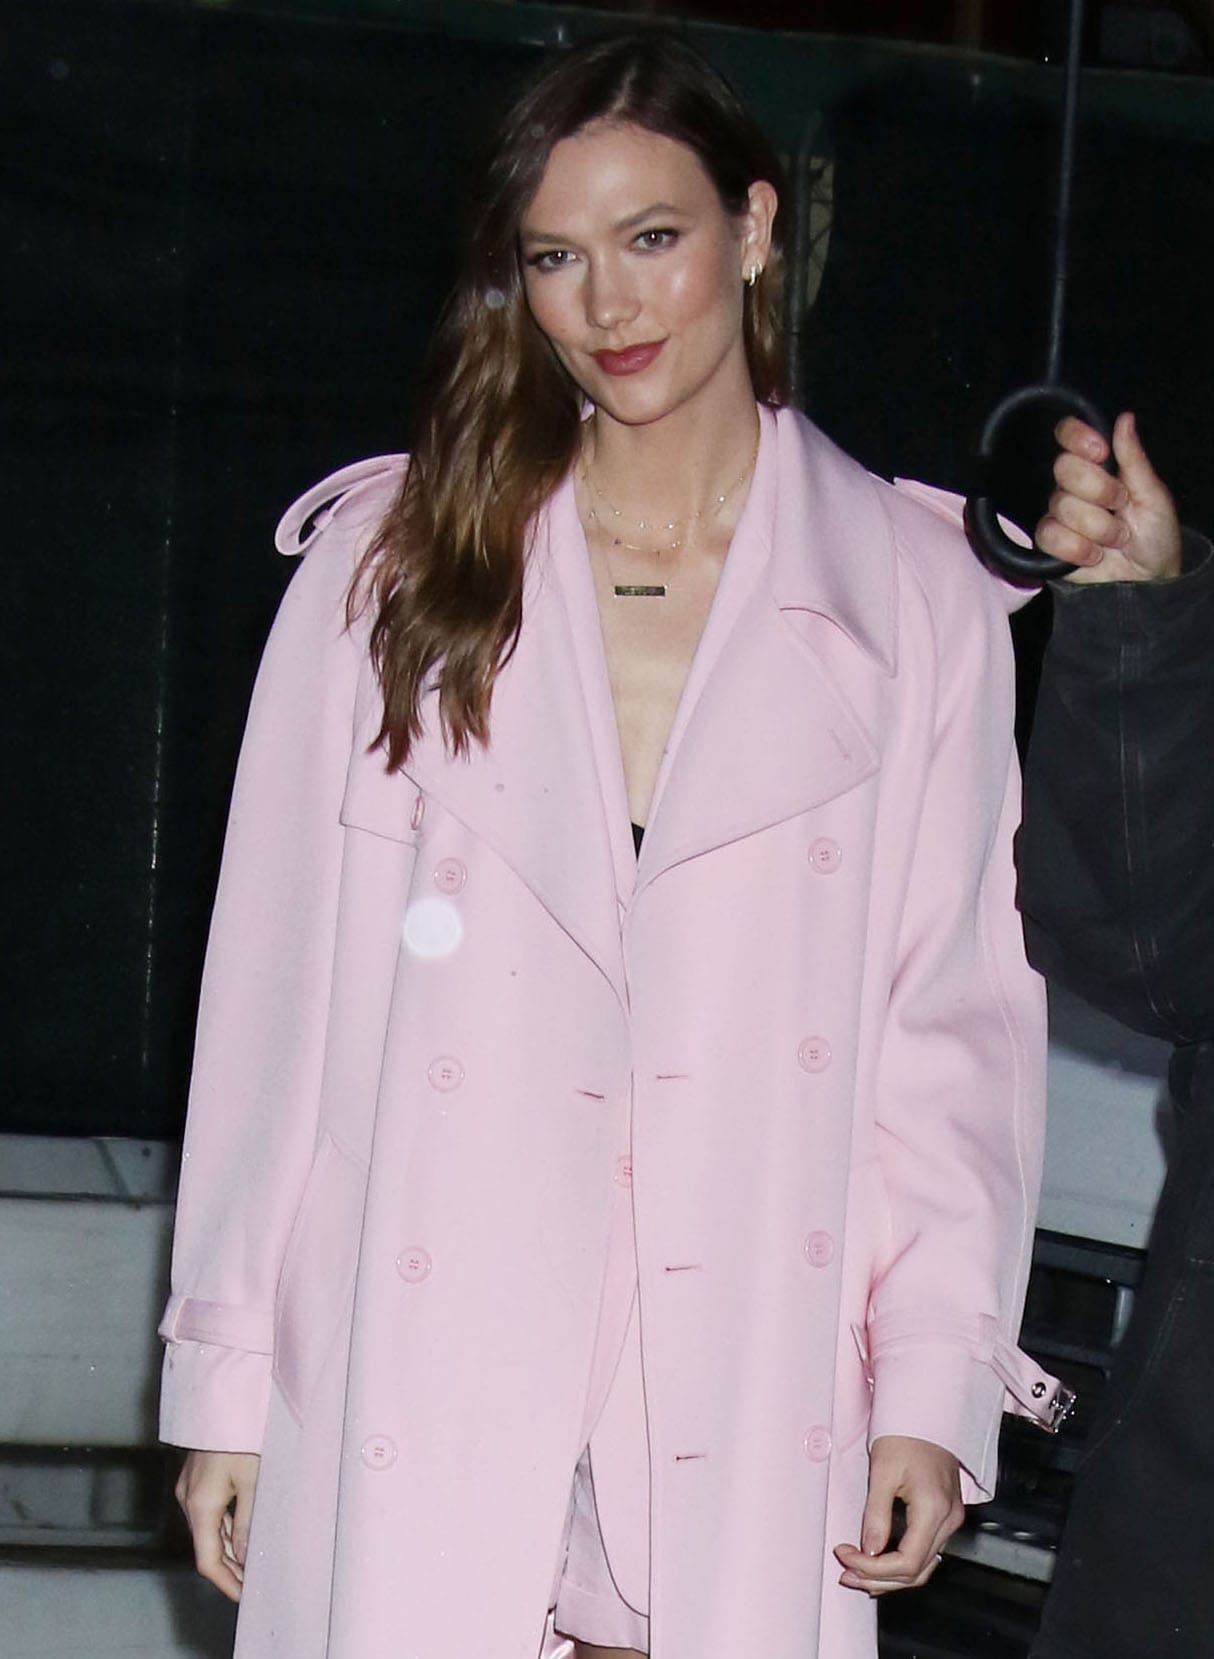 Karlie Kloss keeps the monochromatic pink look going with pink lip color and highlights her eyes with mascara and eyeliner